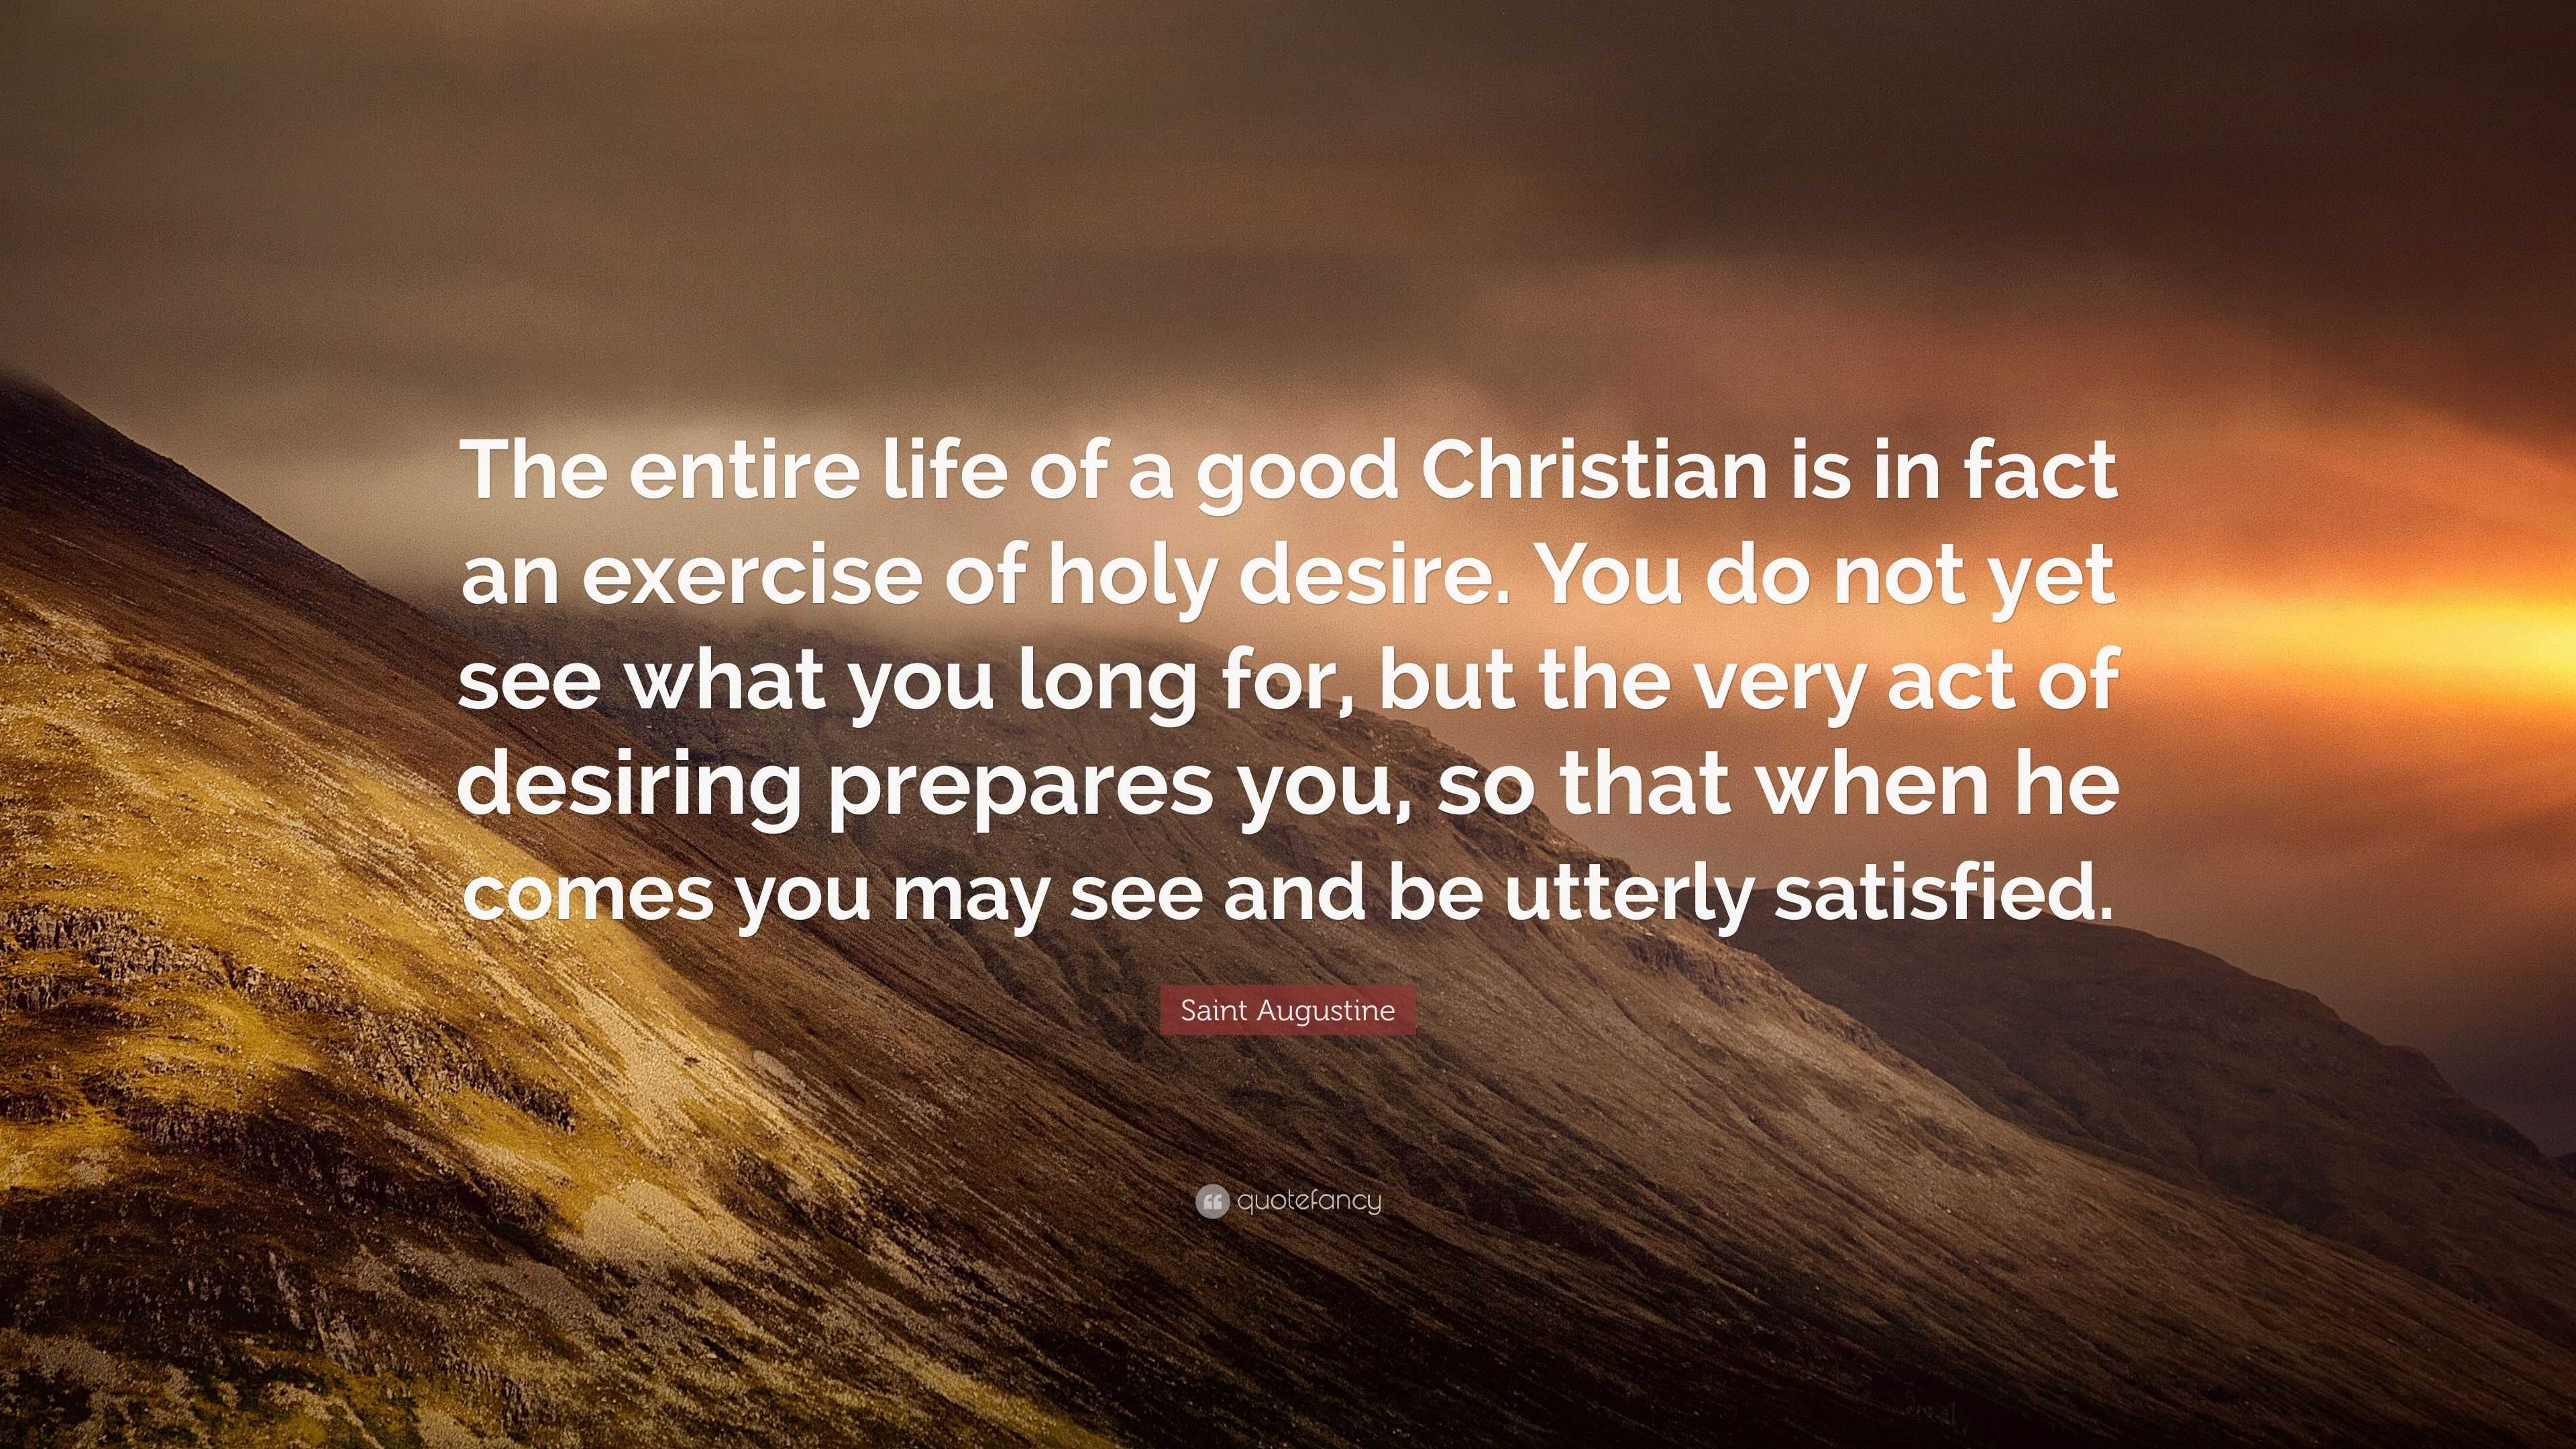 Saint Augustine Quote: “The entire life of a good Christian is in fact ...